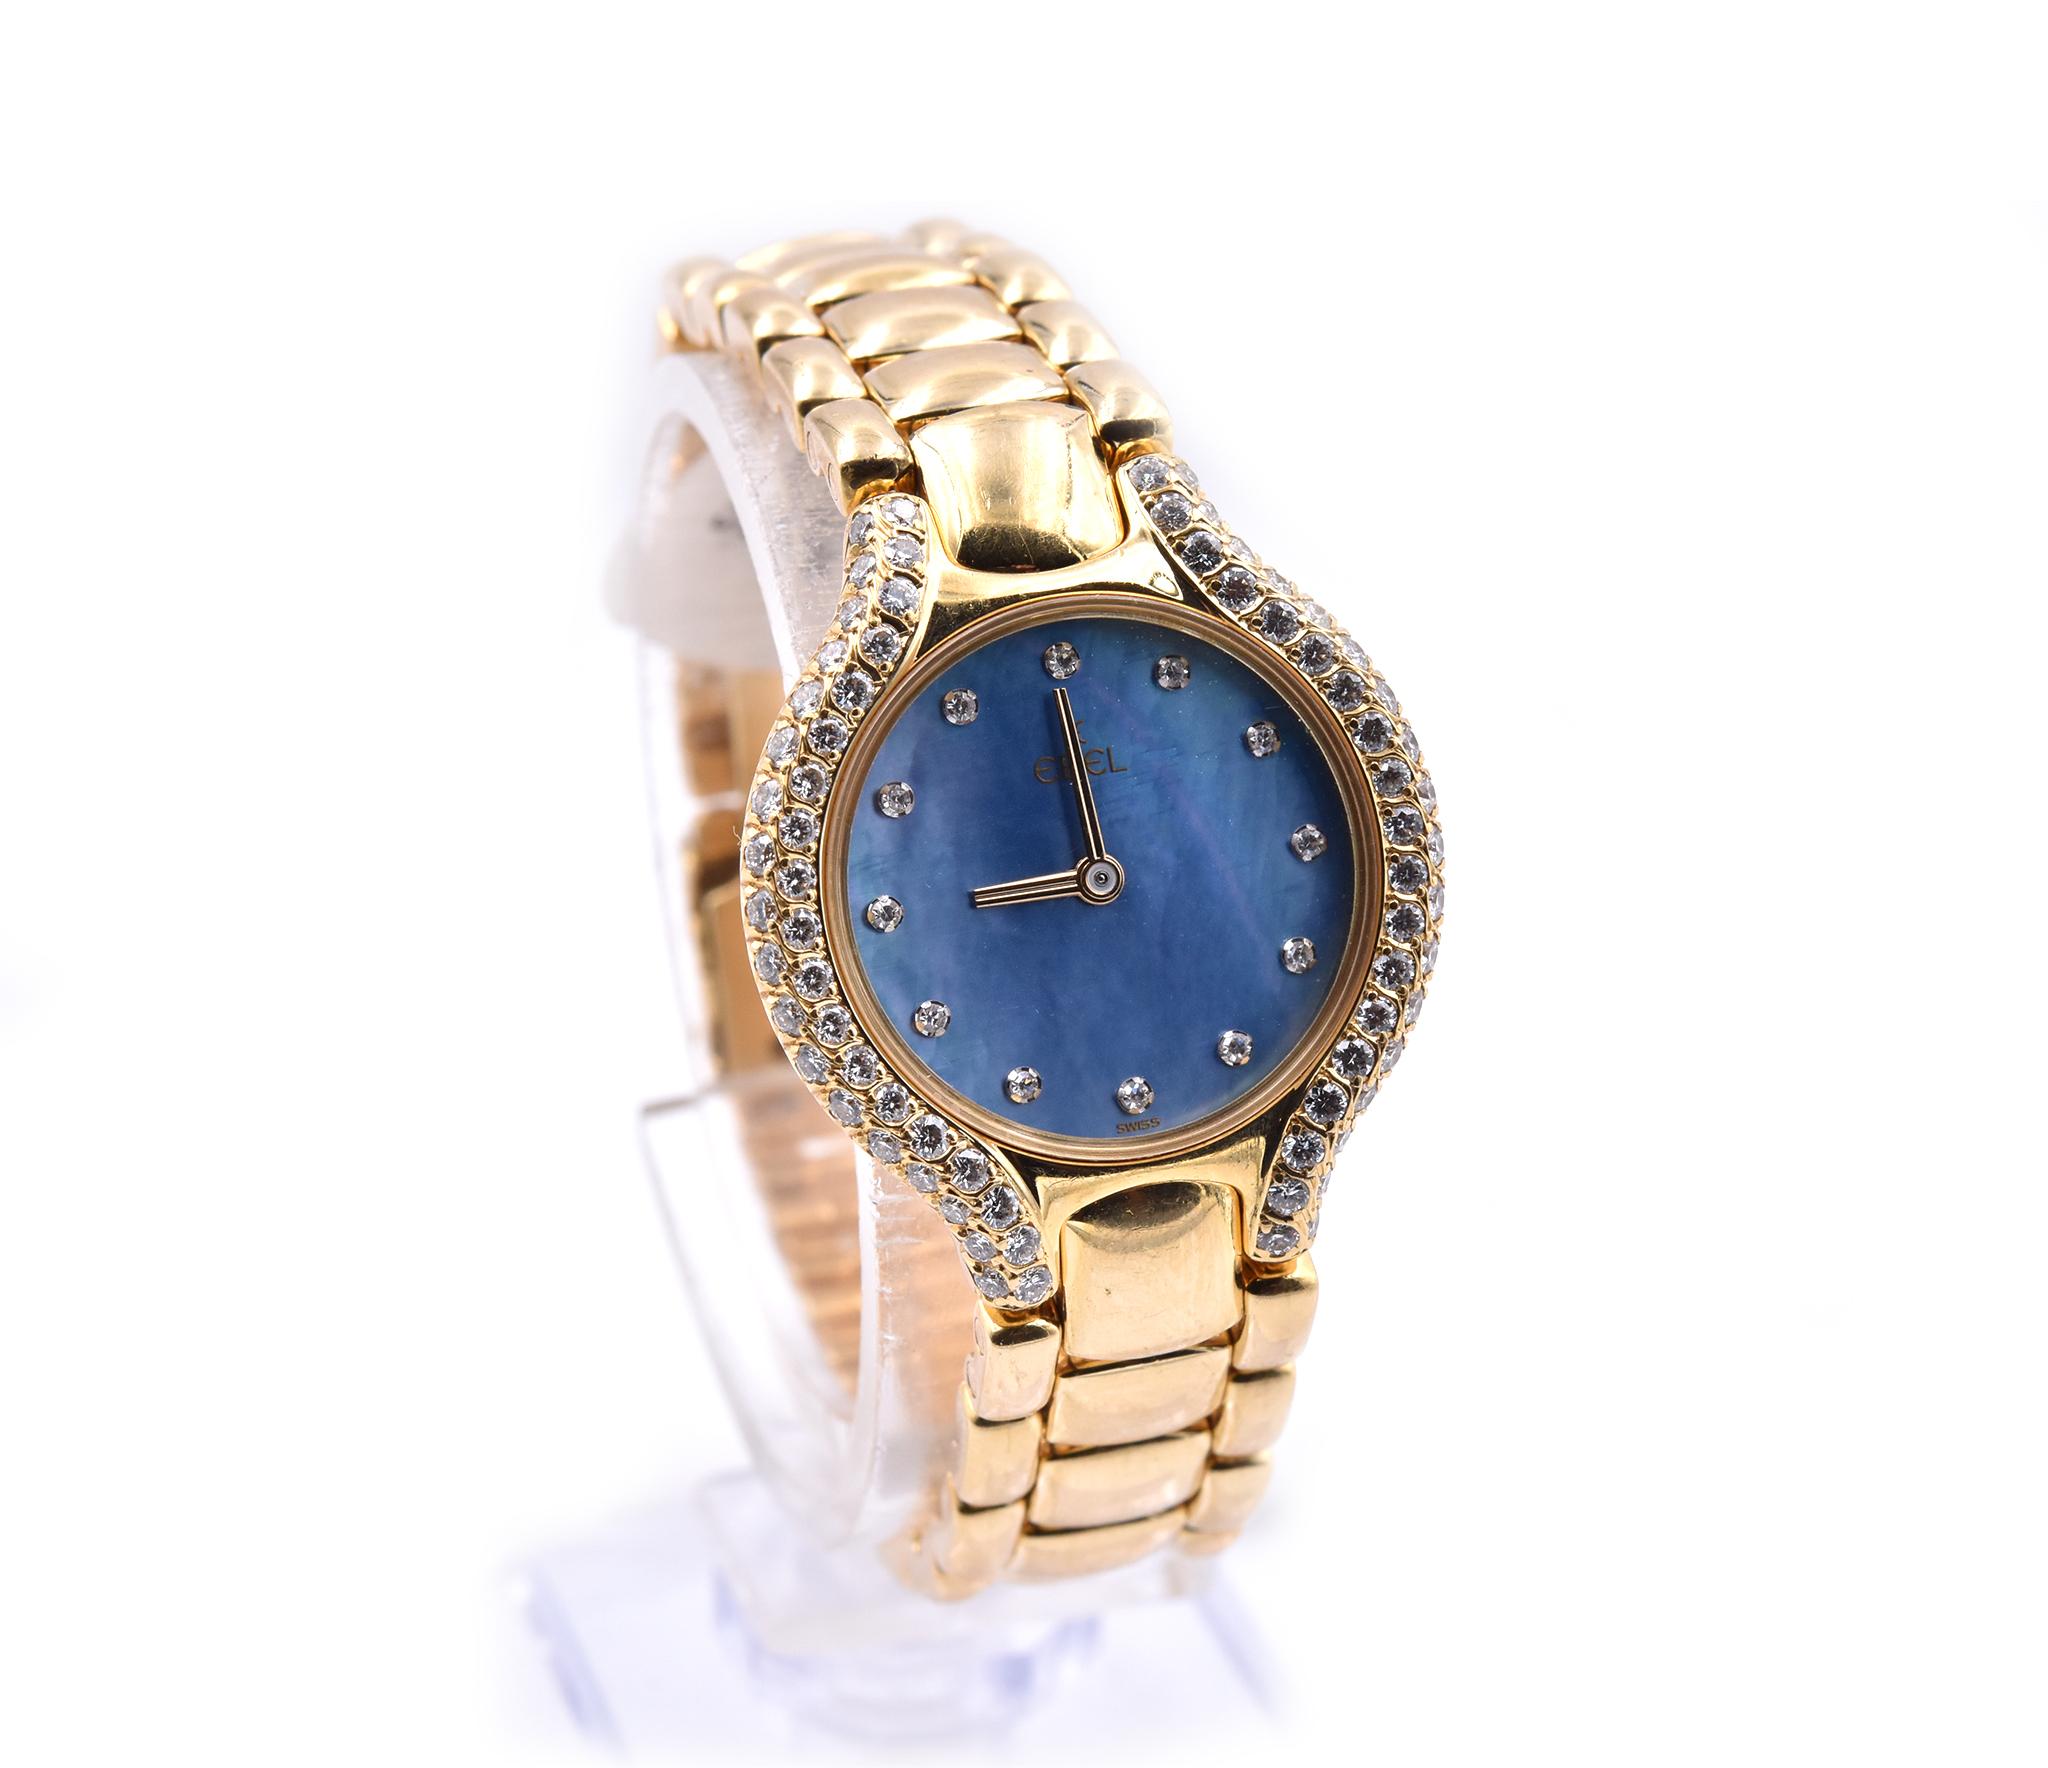 Movement: automatic
Function: hours, minutes 
Case: round 24mm yellow gold case, sapphire crystal, pave set diamond bezel, push/pull crown
Band: Ebel yellow gold bracelet with deployment clasp
Dial: blue mother of pearl dial, diamond hour